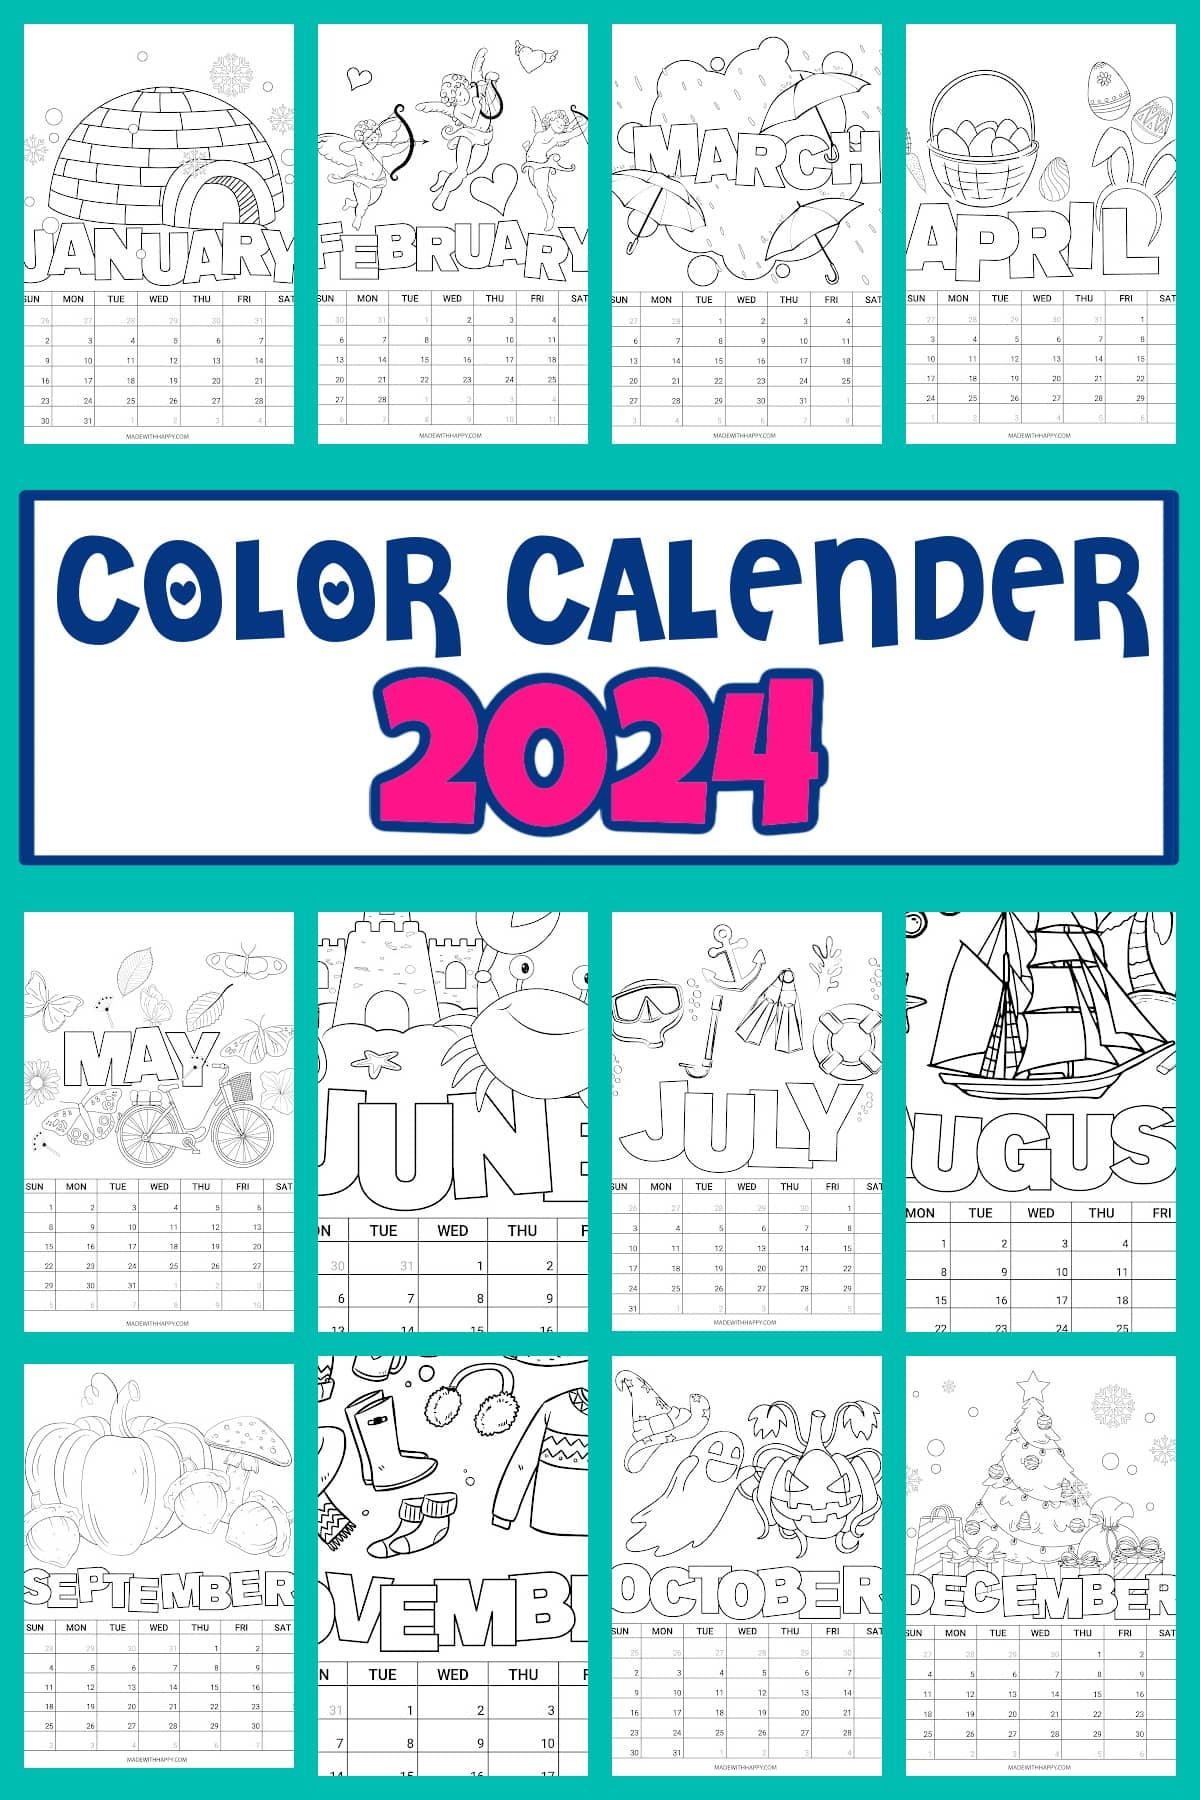 2024 Printable Coloring Calendar For Kids - Made With Happy regarding Free Printable Calendar 2024 For Elementary